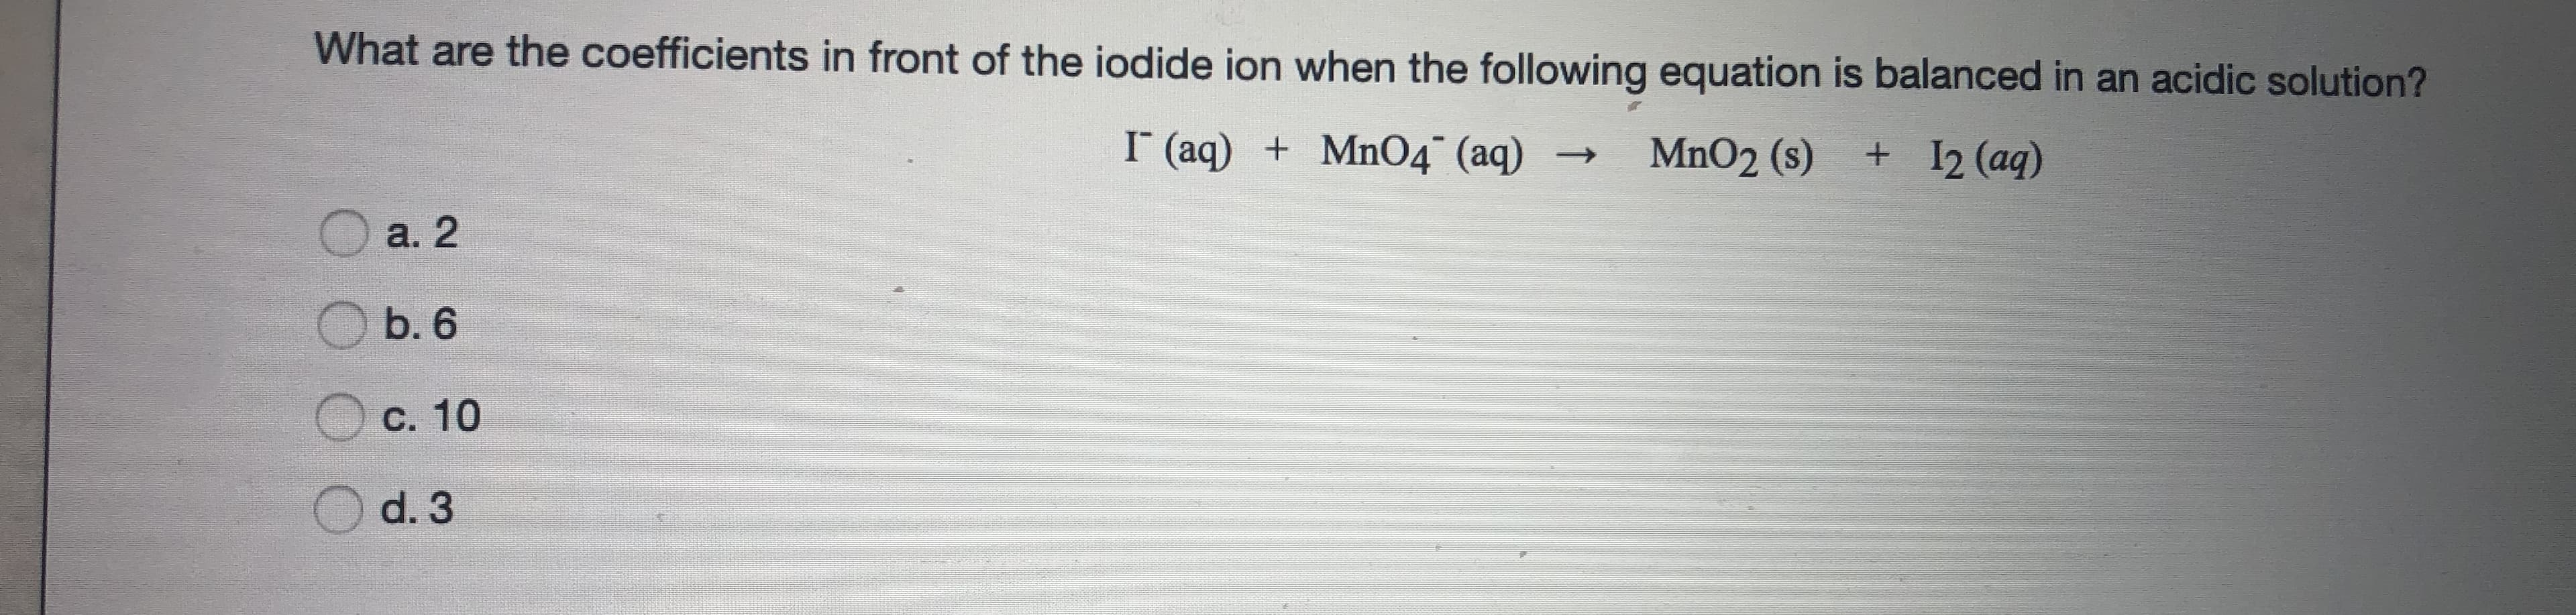 What are the coefficients in front of the iodide ion when the following equation is balanced in an acidic solution?
I (aq) + Mn04° (aq) →
MnO2 (s)
+ 12 (aq)
O a. 2
Б.6
C. 10
d. 3
